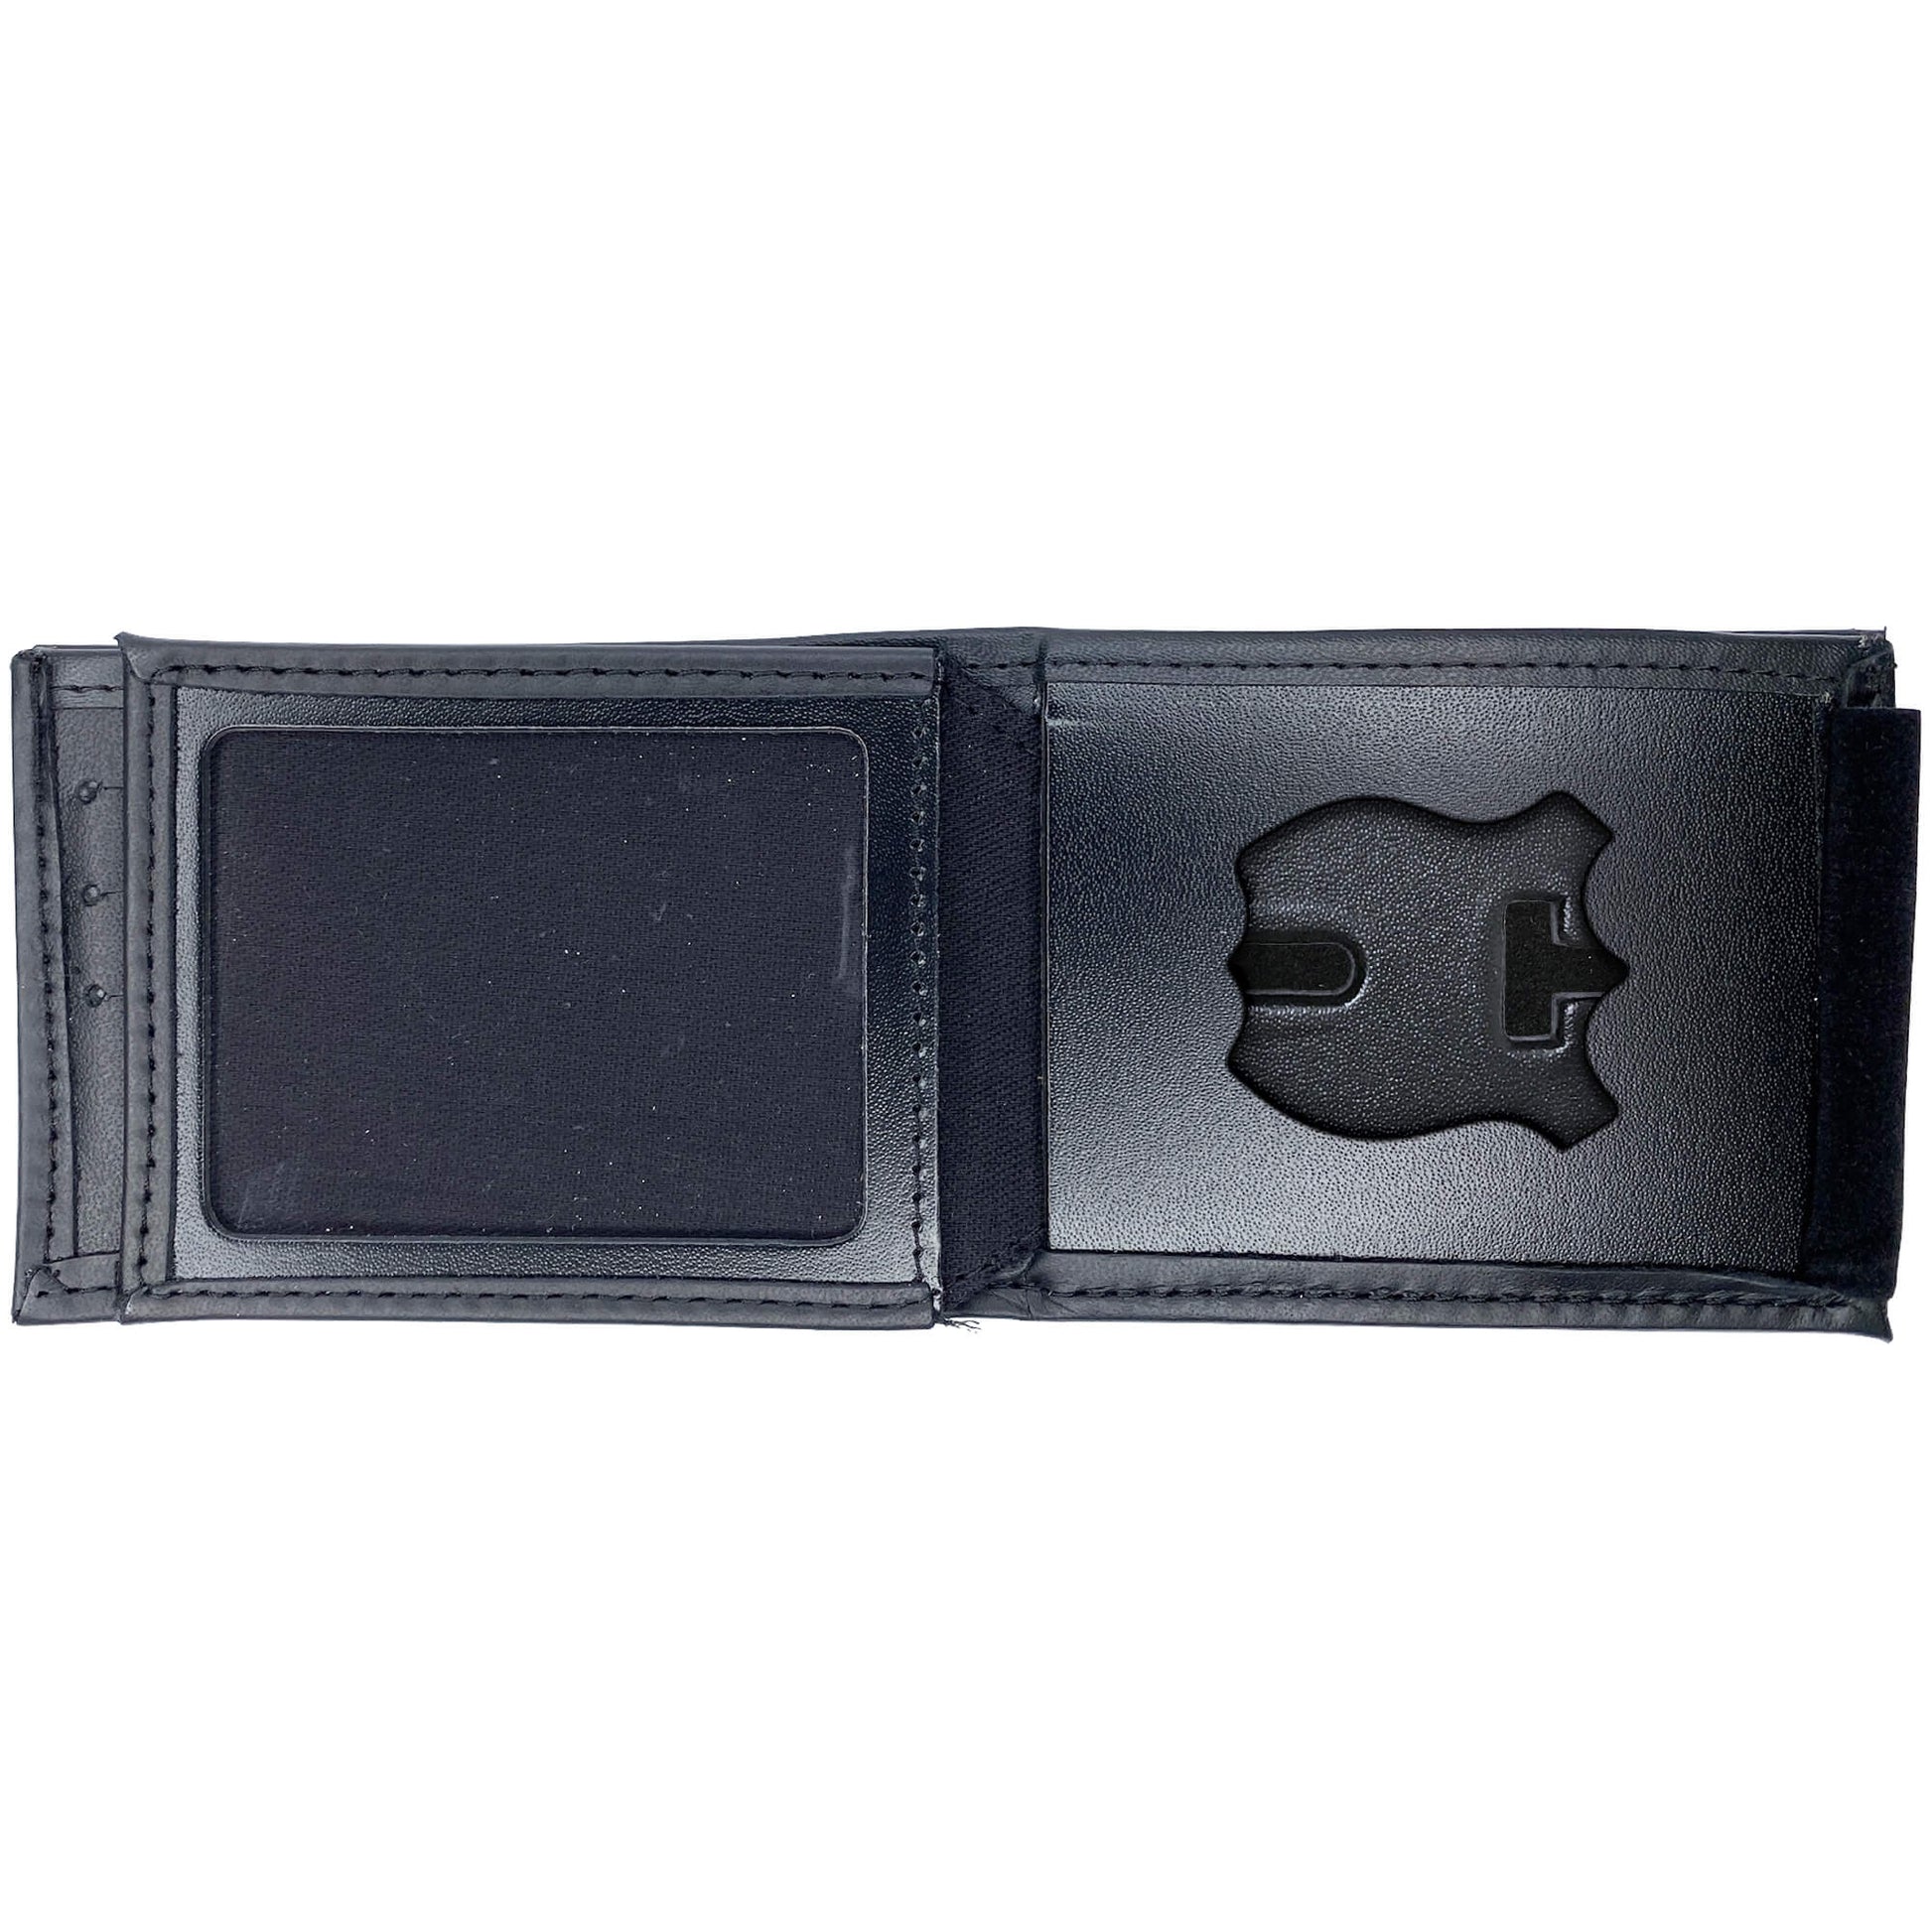 Ontario Corrections Officer Hidden Badge Wallet-Perfect Fit-911 Duty Gear Canada